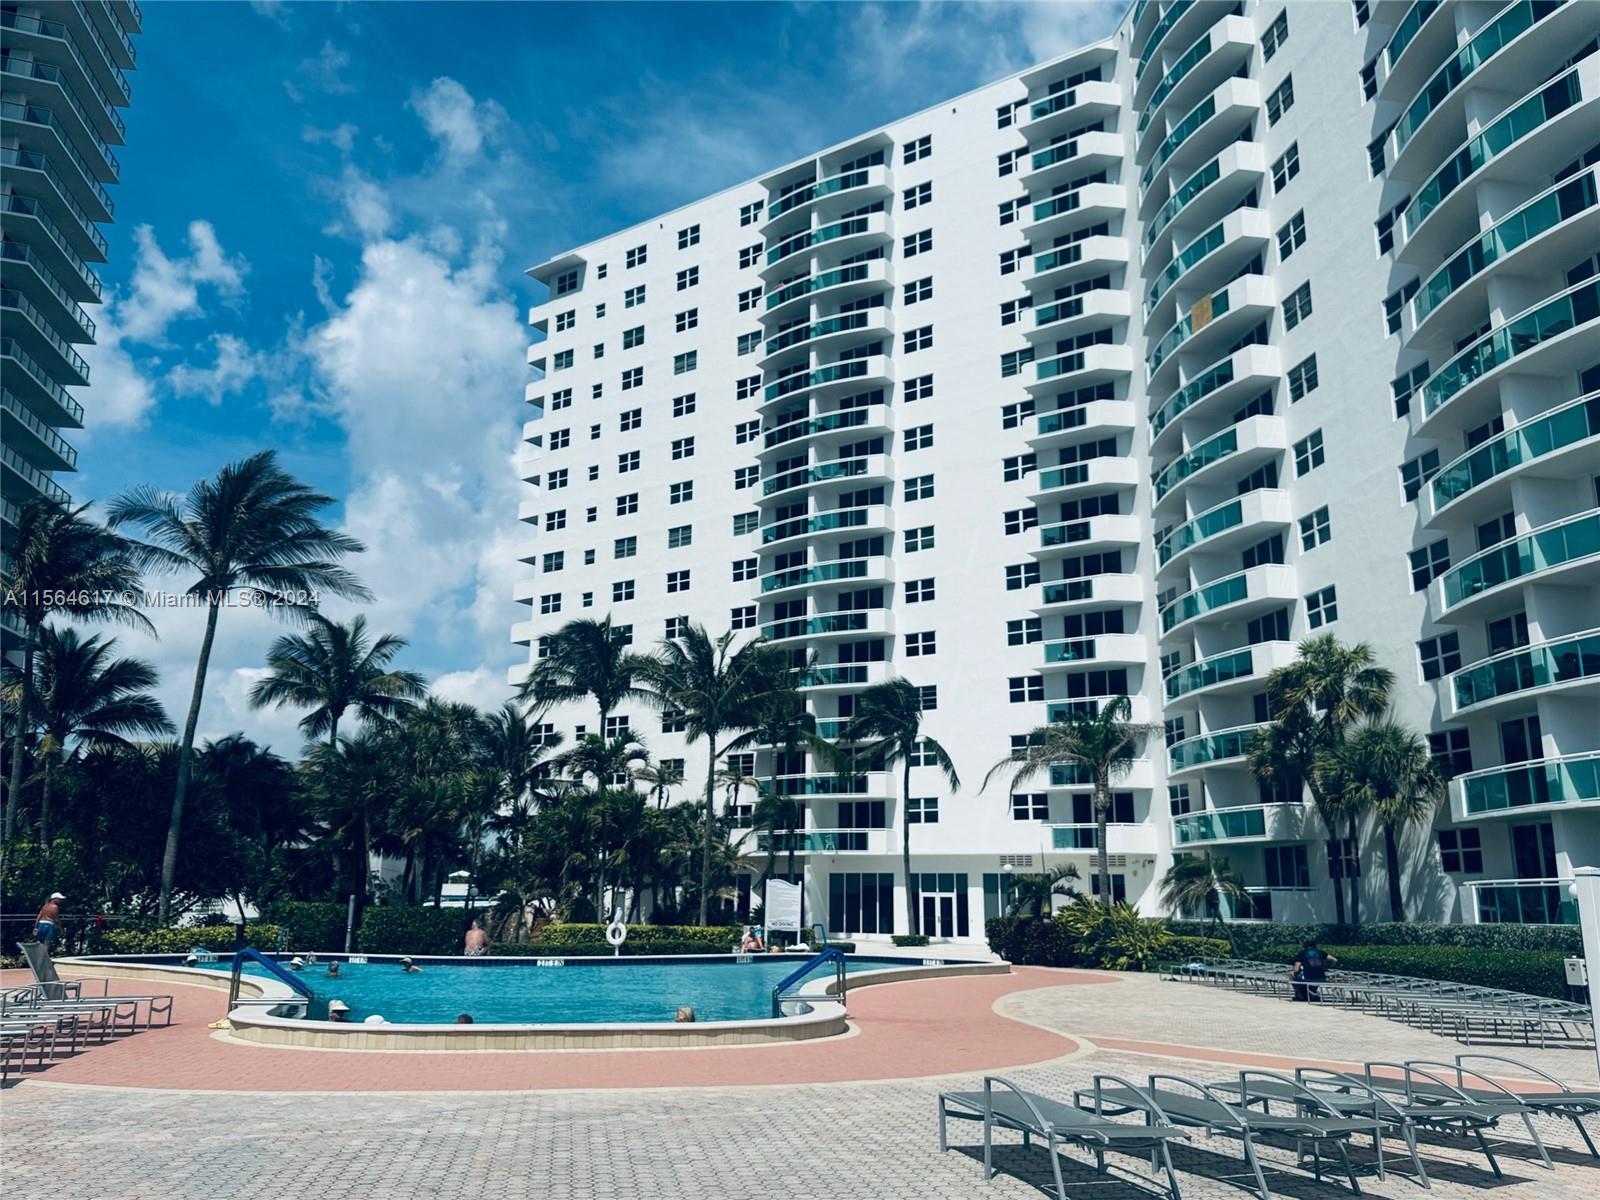 Photo of 3001 S Ocean Dr #249 in Hollywood, FL